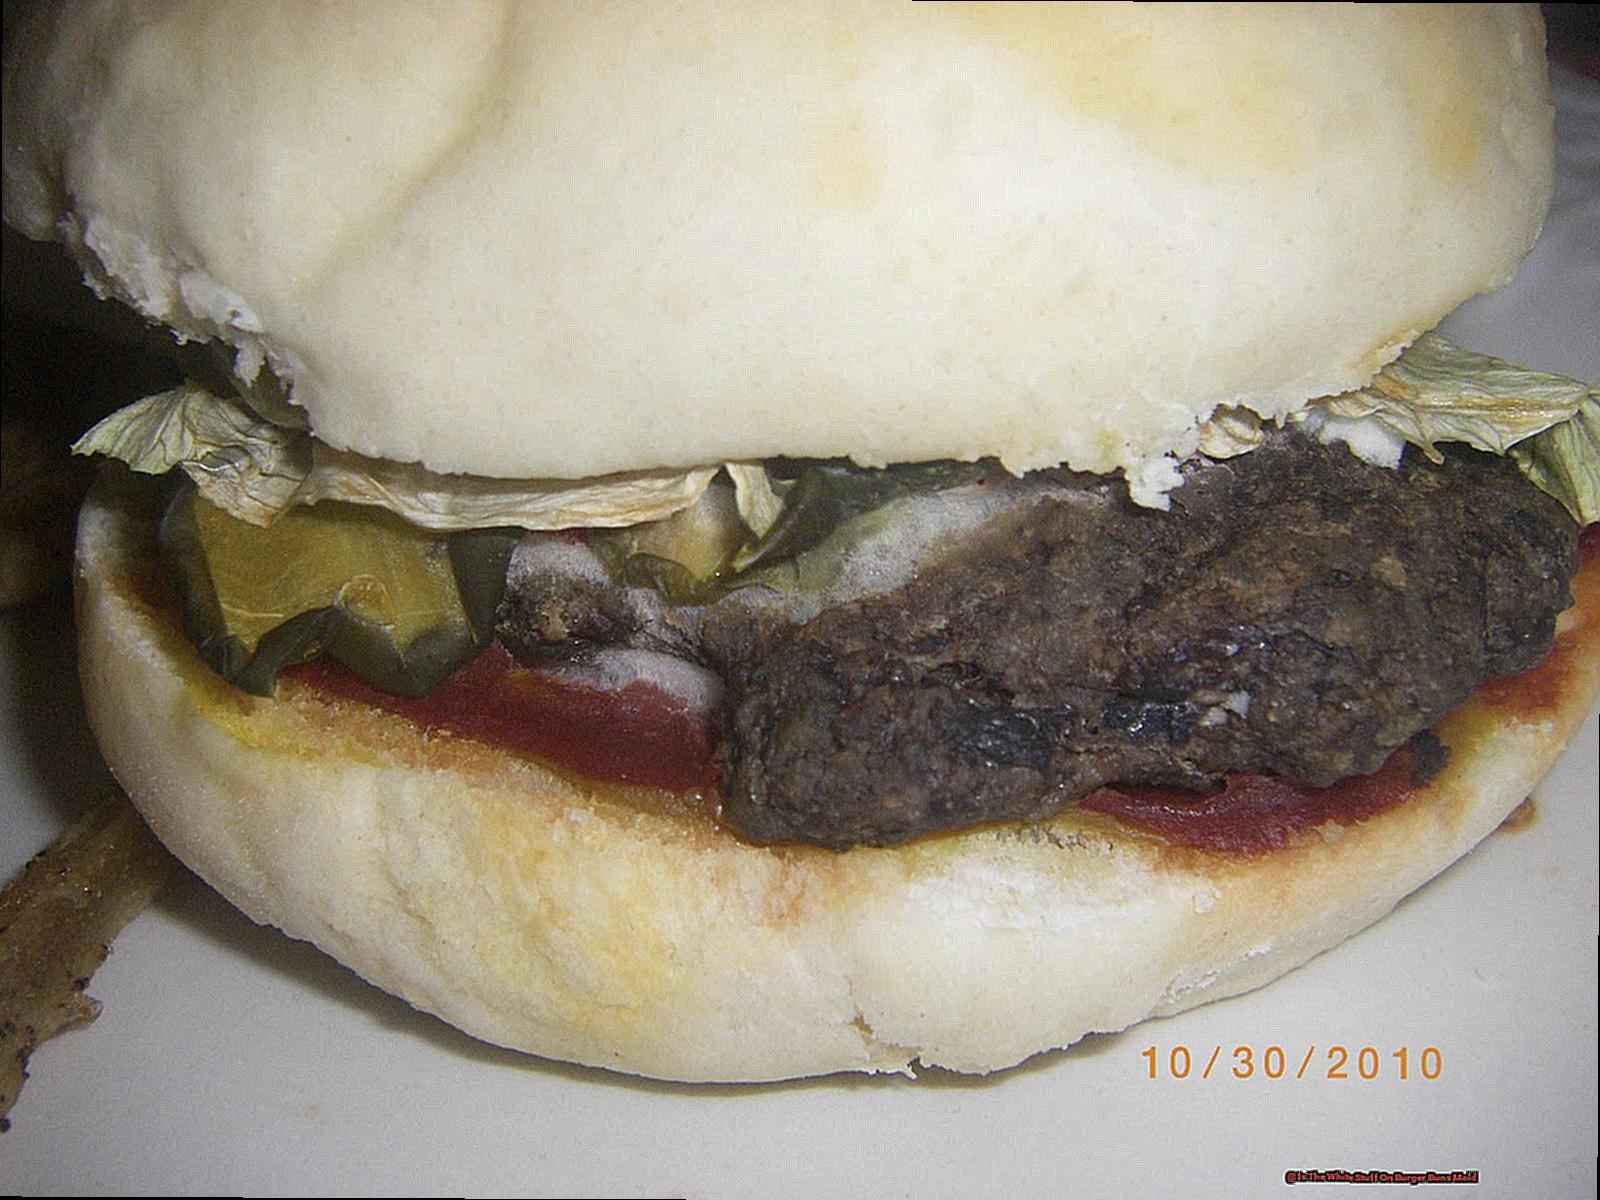 Is The White Stuff On Burger Buns Mold-4